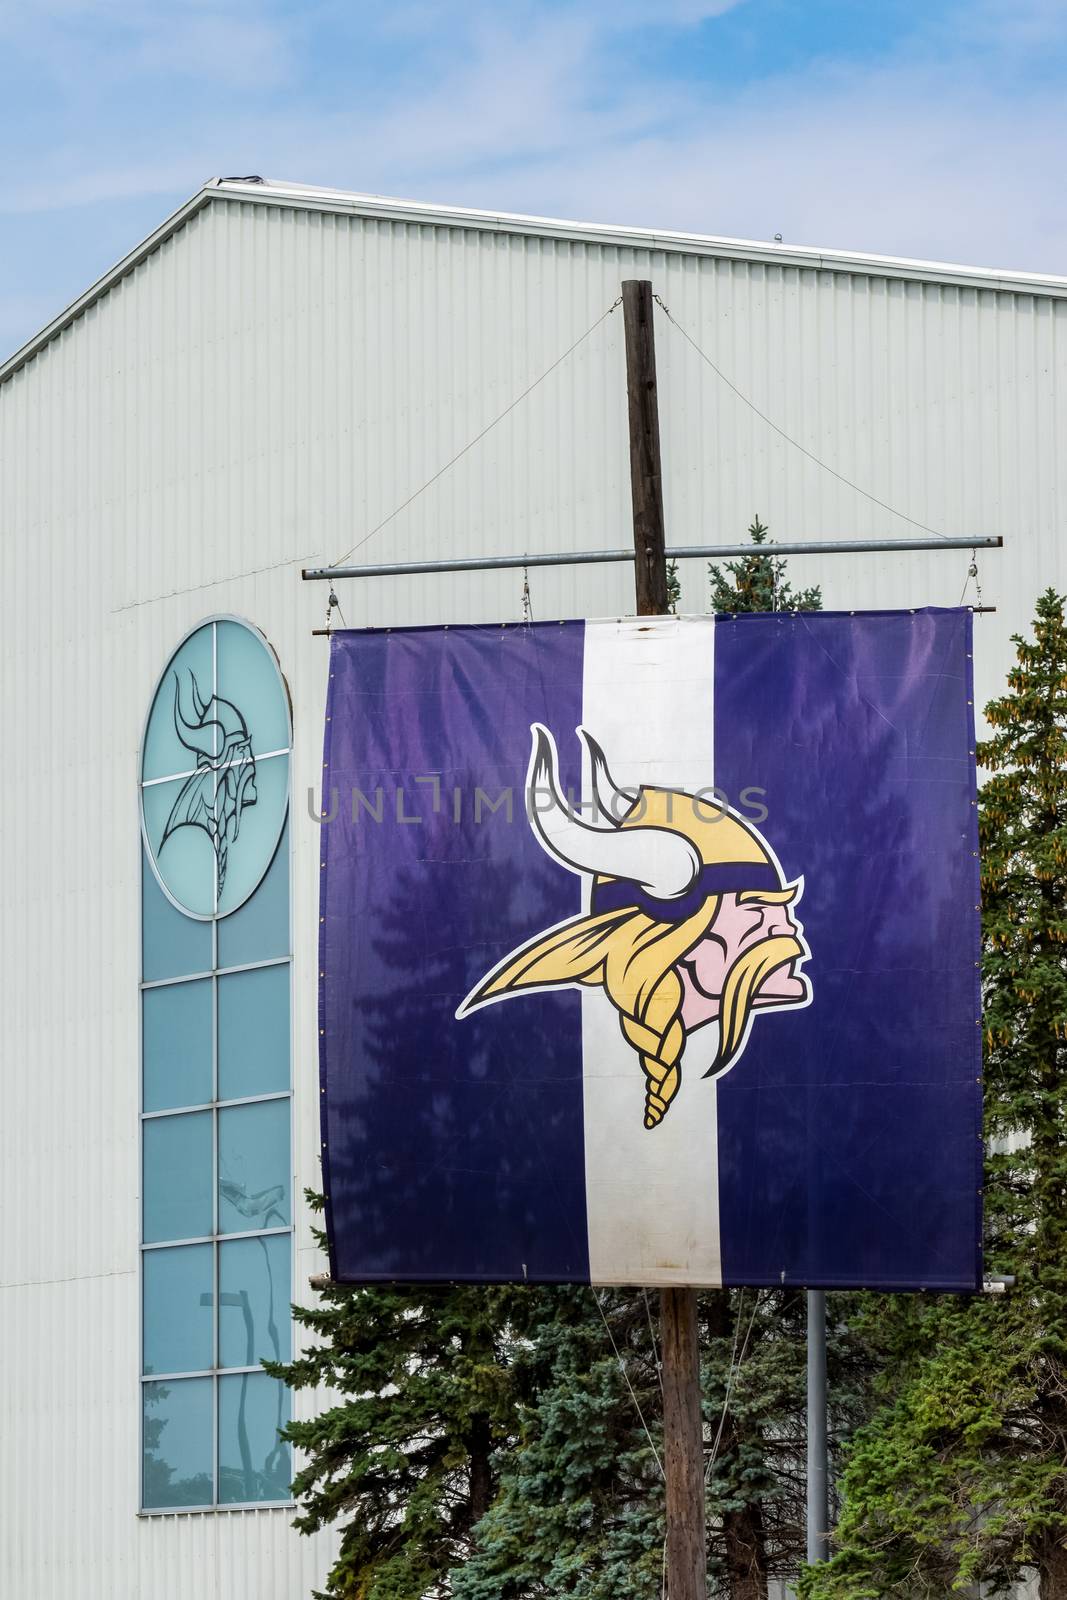 Minnesota Vikings Practice Facility and Flag by wolterk